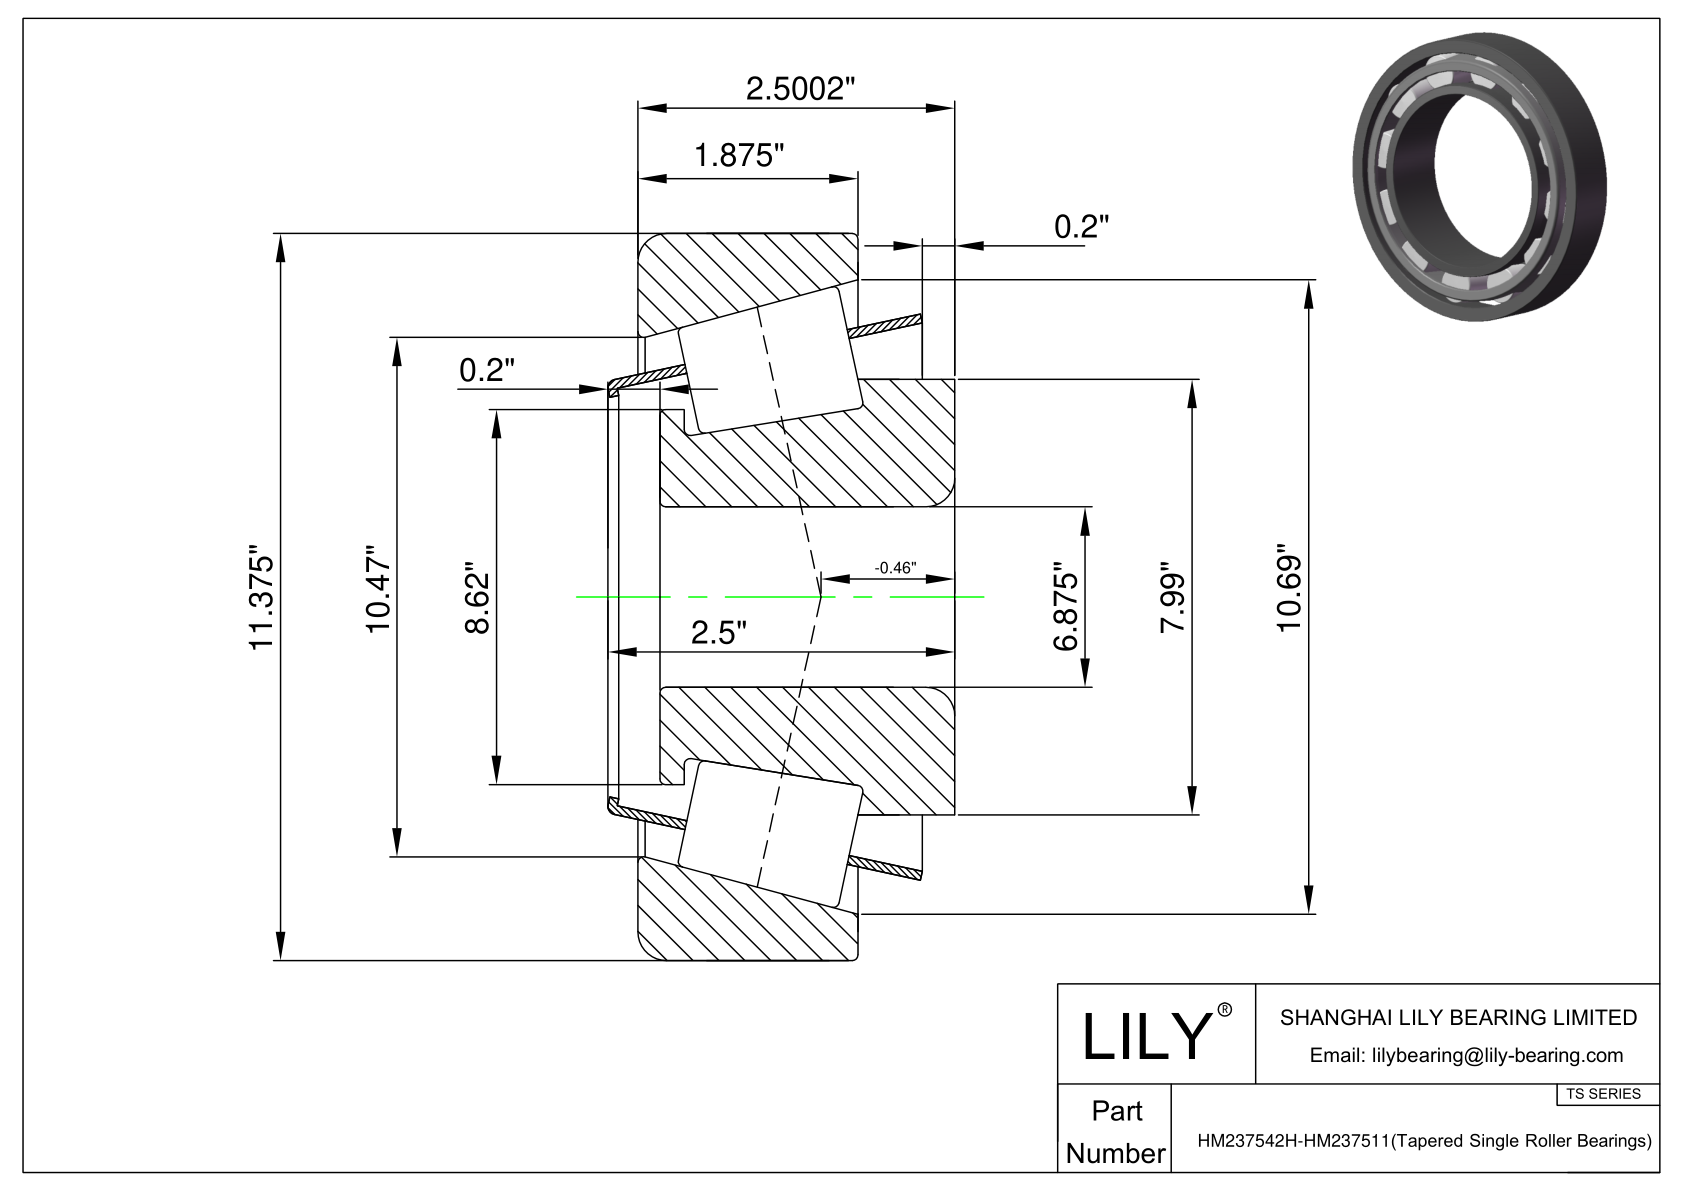 HM237542H-HM237511 TS (Tapered Single Roller Bearings) (Imperial) cad drawing